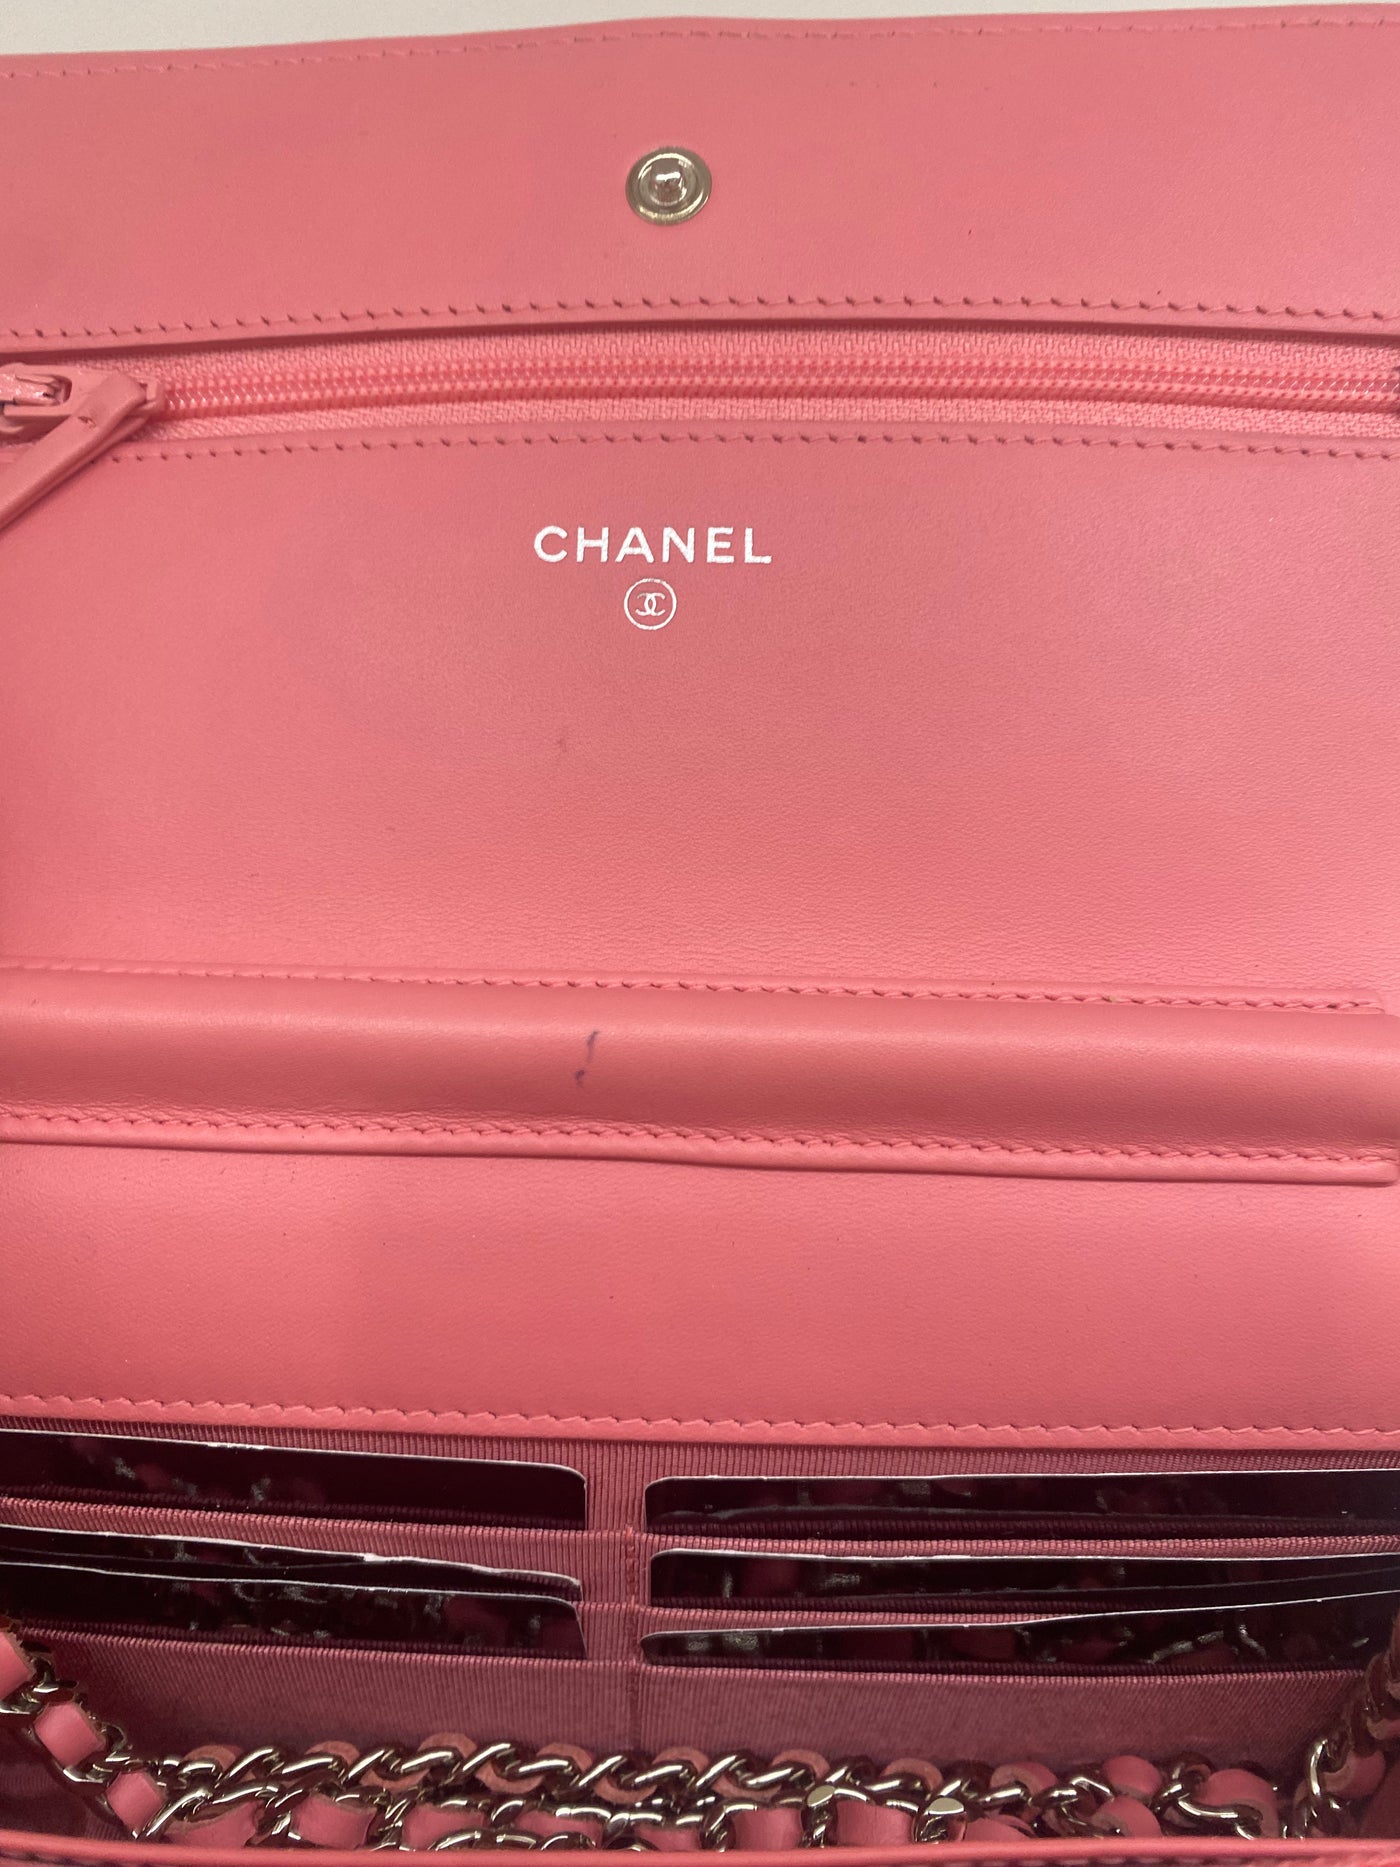 Chanel Pink WOC Patent Leather